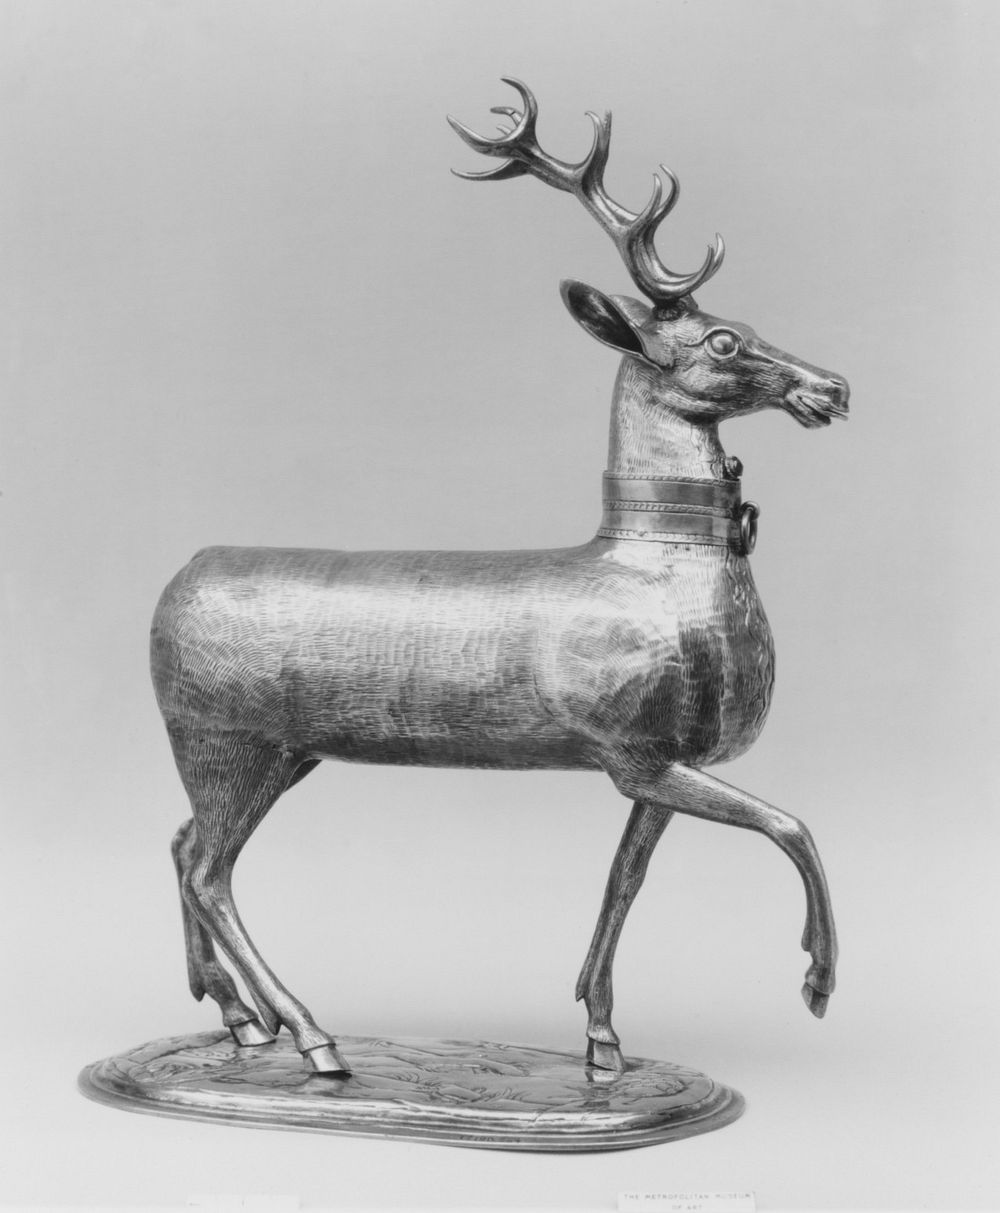 Cup in the form of a stag